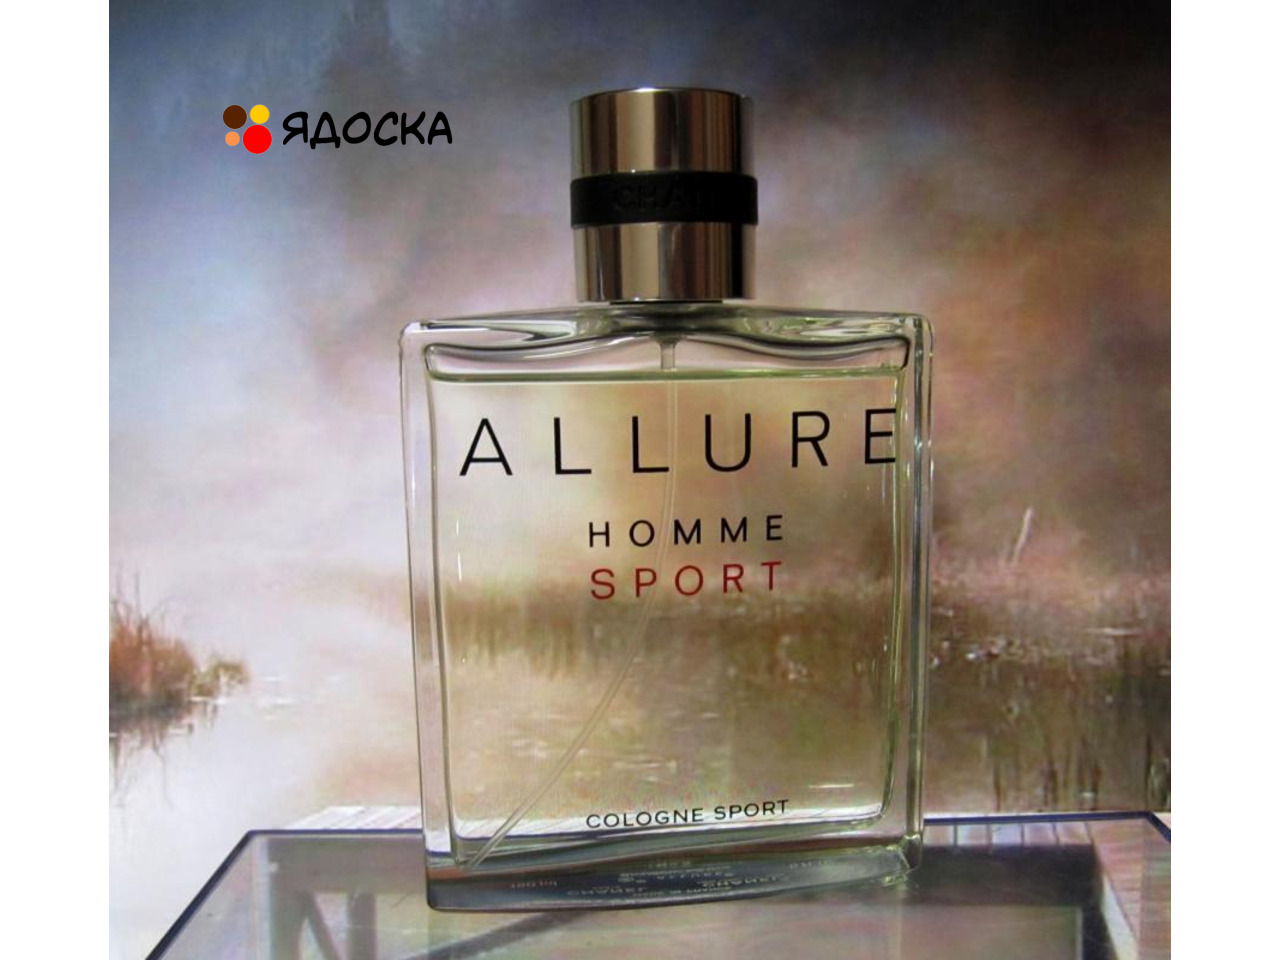 Chanel allure homme cologne. Chanel Allure homme Sport Cologne. Chanel homme Sport Cologne. Chanel Allure Sport Cologne EDC. Chanel Allure homme Cologne 100 ml.